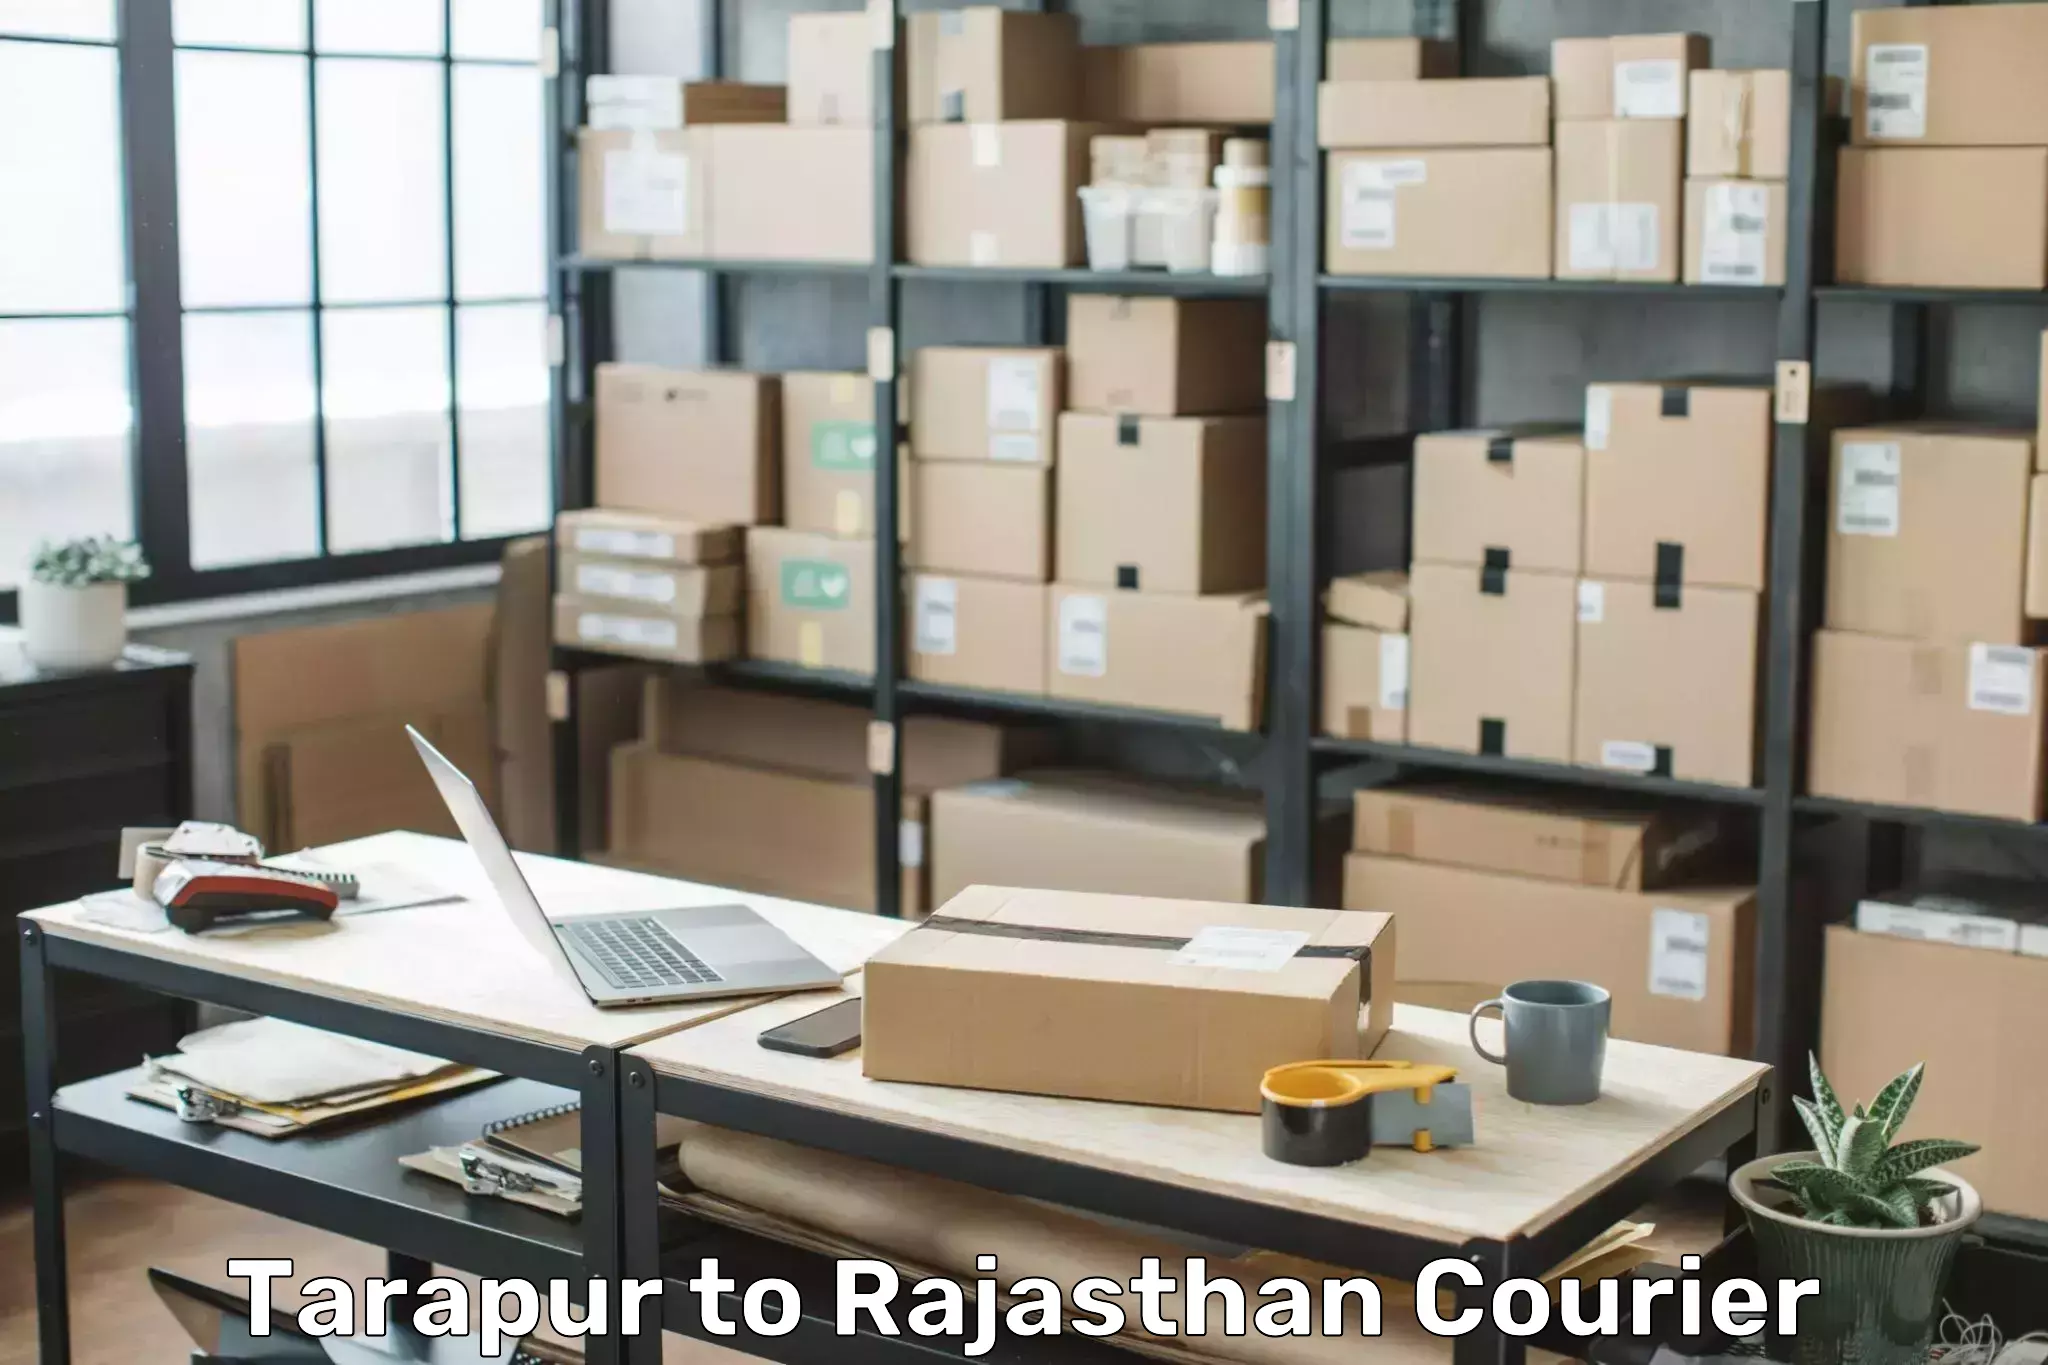 Instant baggage transport quote Tarapur to Rajasthan